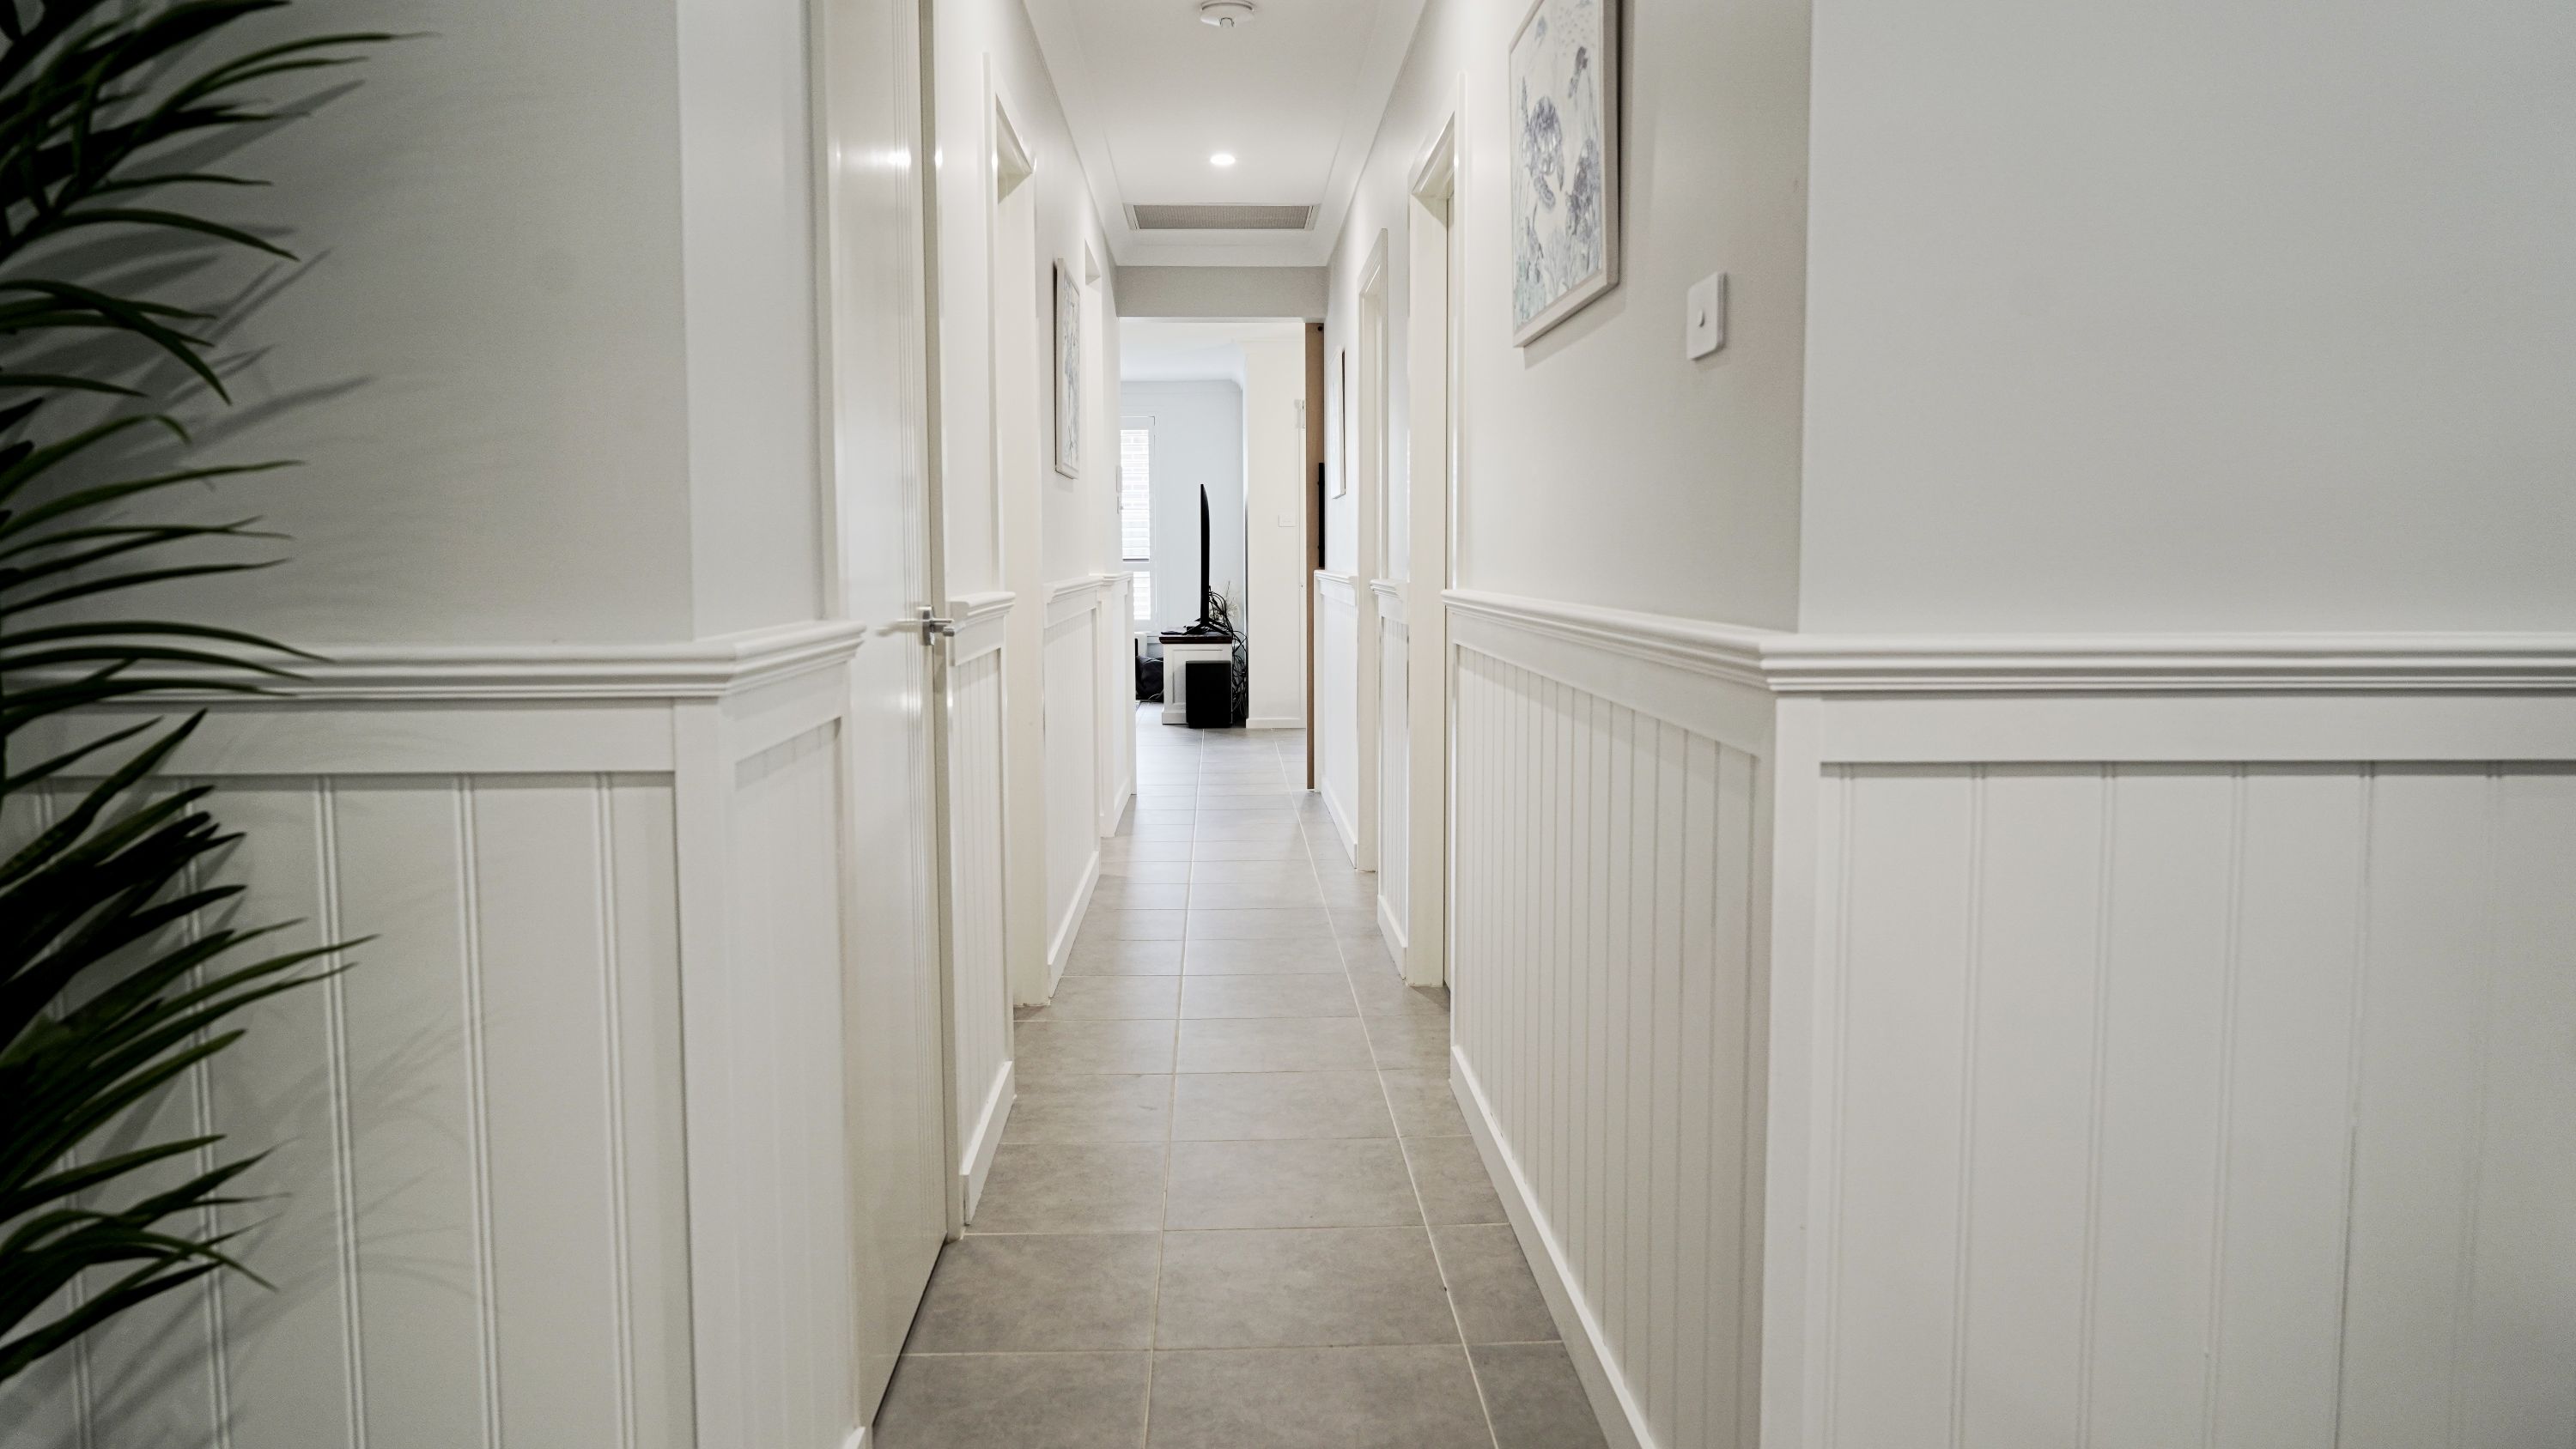 Wainscoting painted white in hallway